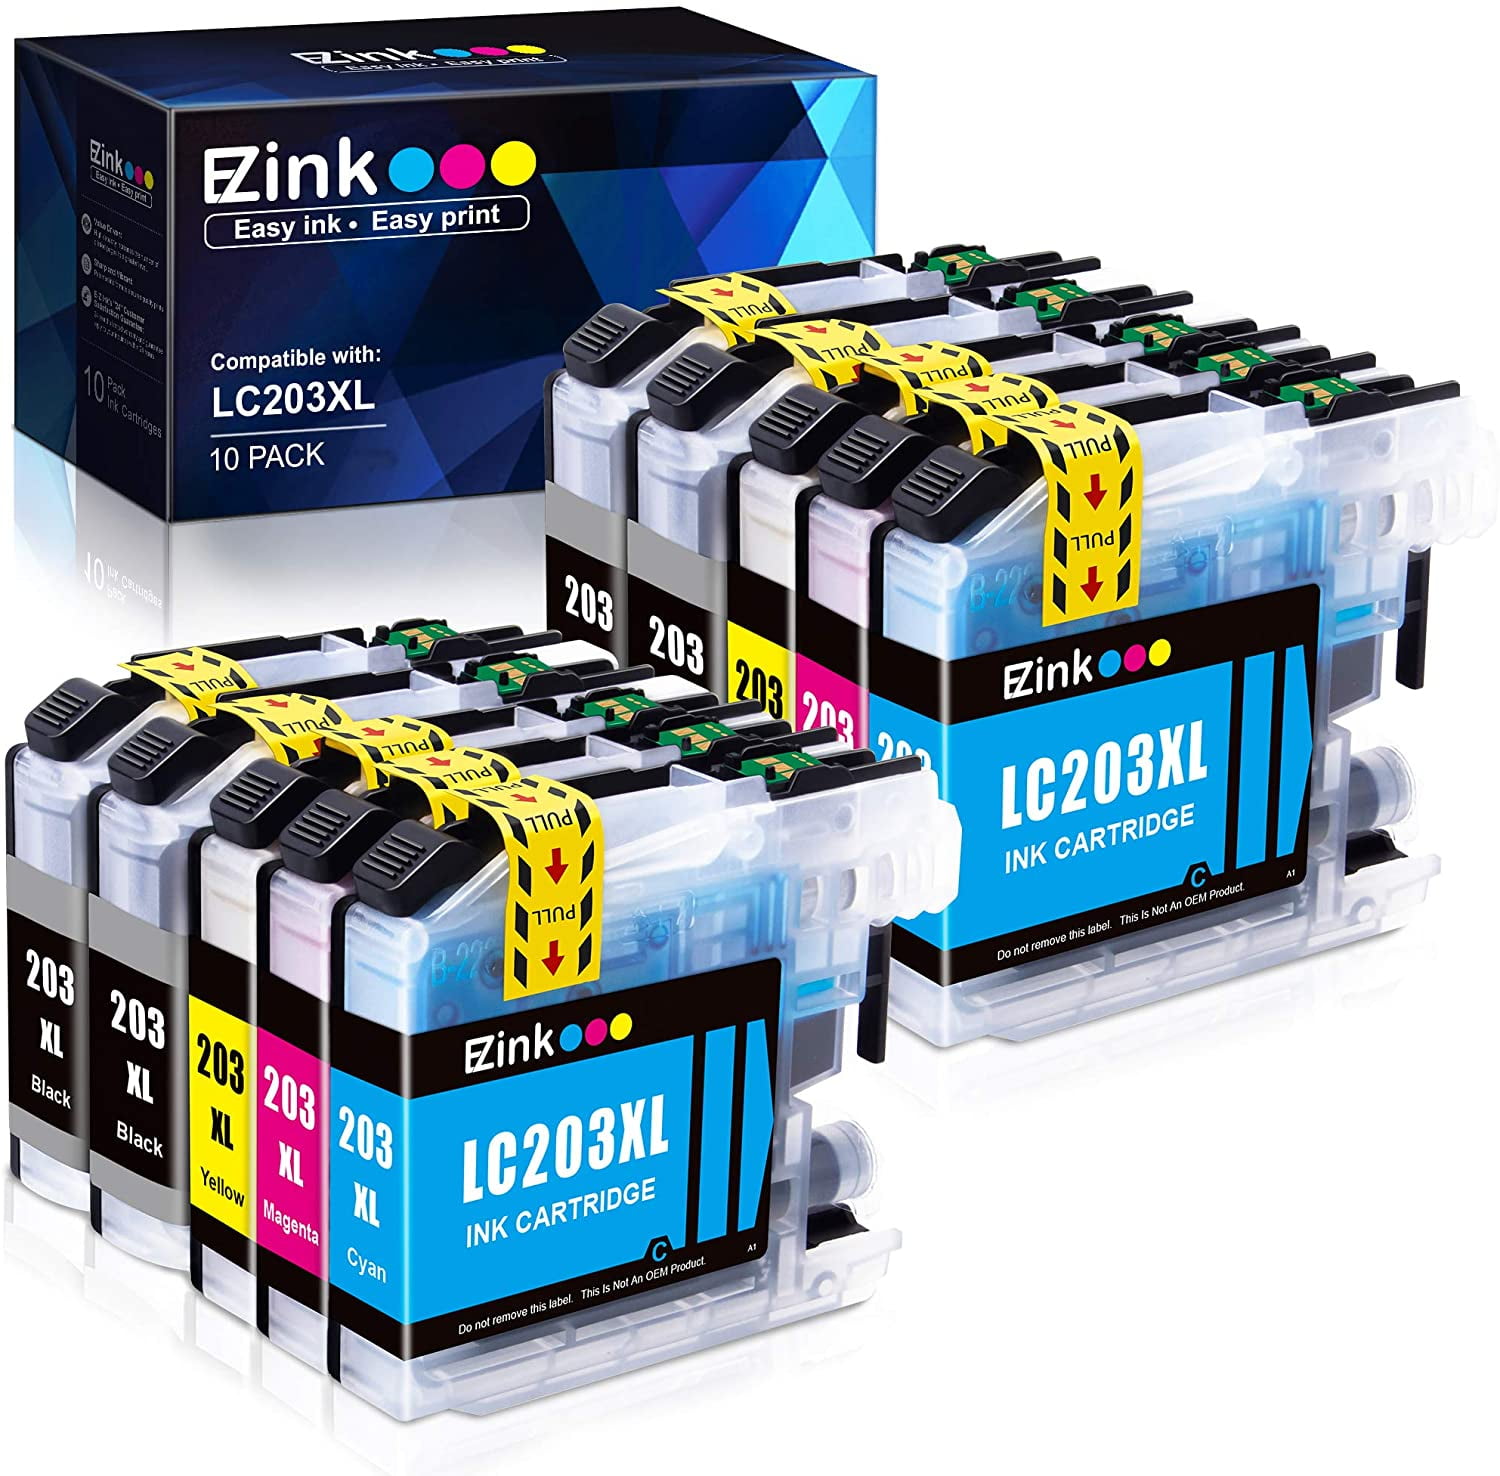 E-Z Ink LC203XL Ink Cartridge Replacement for Brother LC203XL LC201XL LC203  LC201 Compatible with MFC-J480DW MFC-J880DW MFC-J4420DW MFC-J680DW